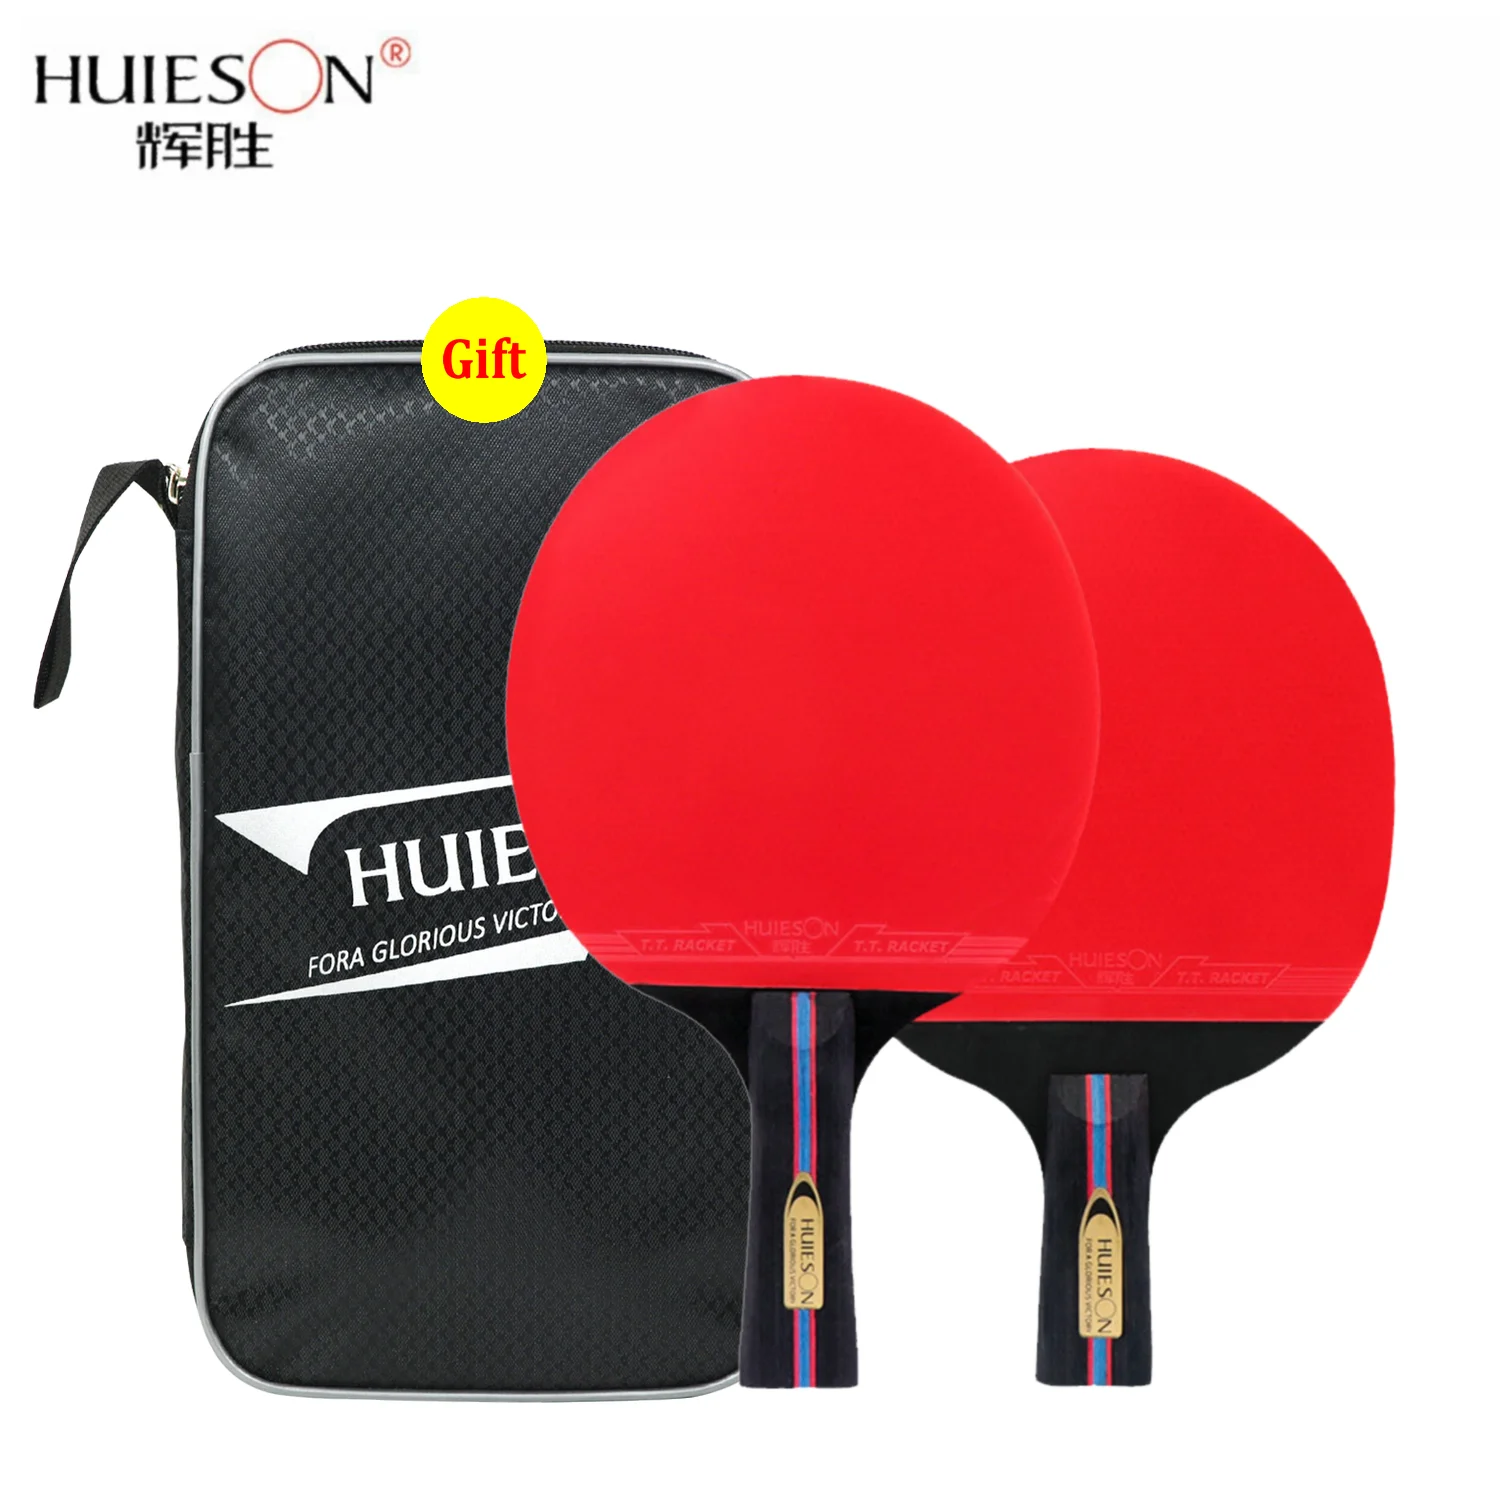 

Huieson 2 Pcs/Set Table Tennis Racket S600 Sticky Double Face Pimples Professional Ping Pong Paddle for Beginner with Free Case